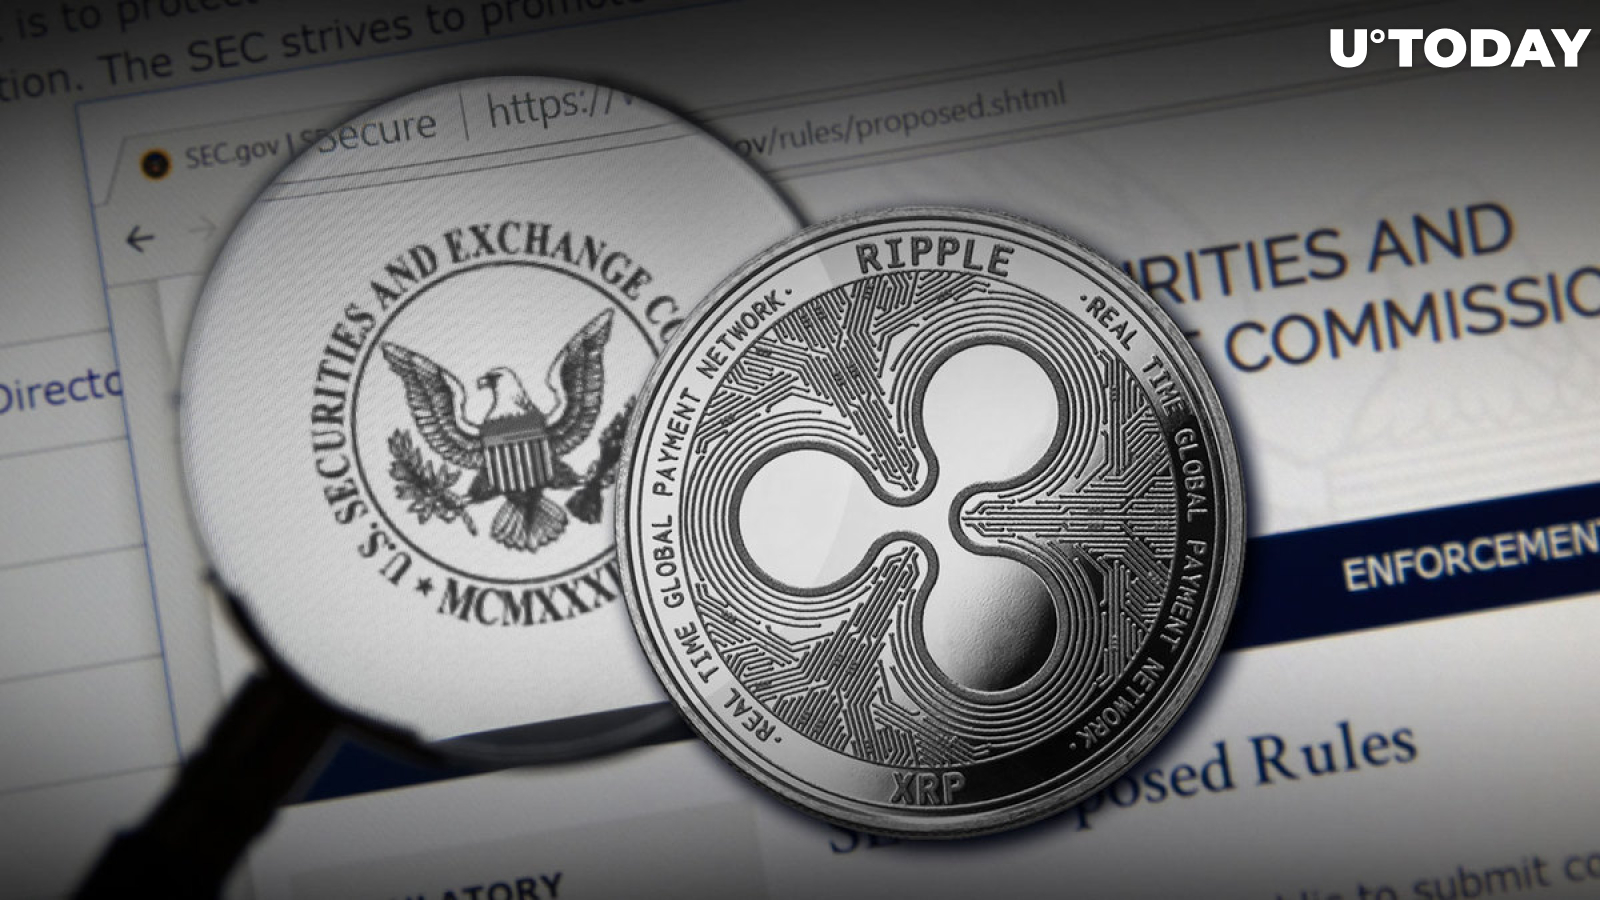 Ripple v. SEC Case Is Advancing, But There Is Outraging Nuance